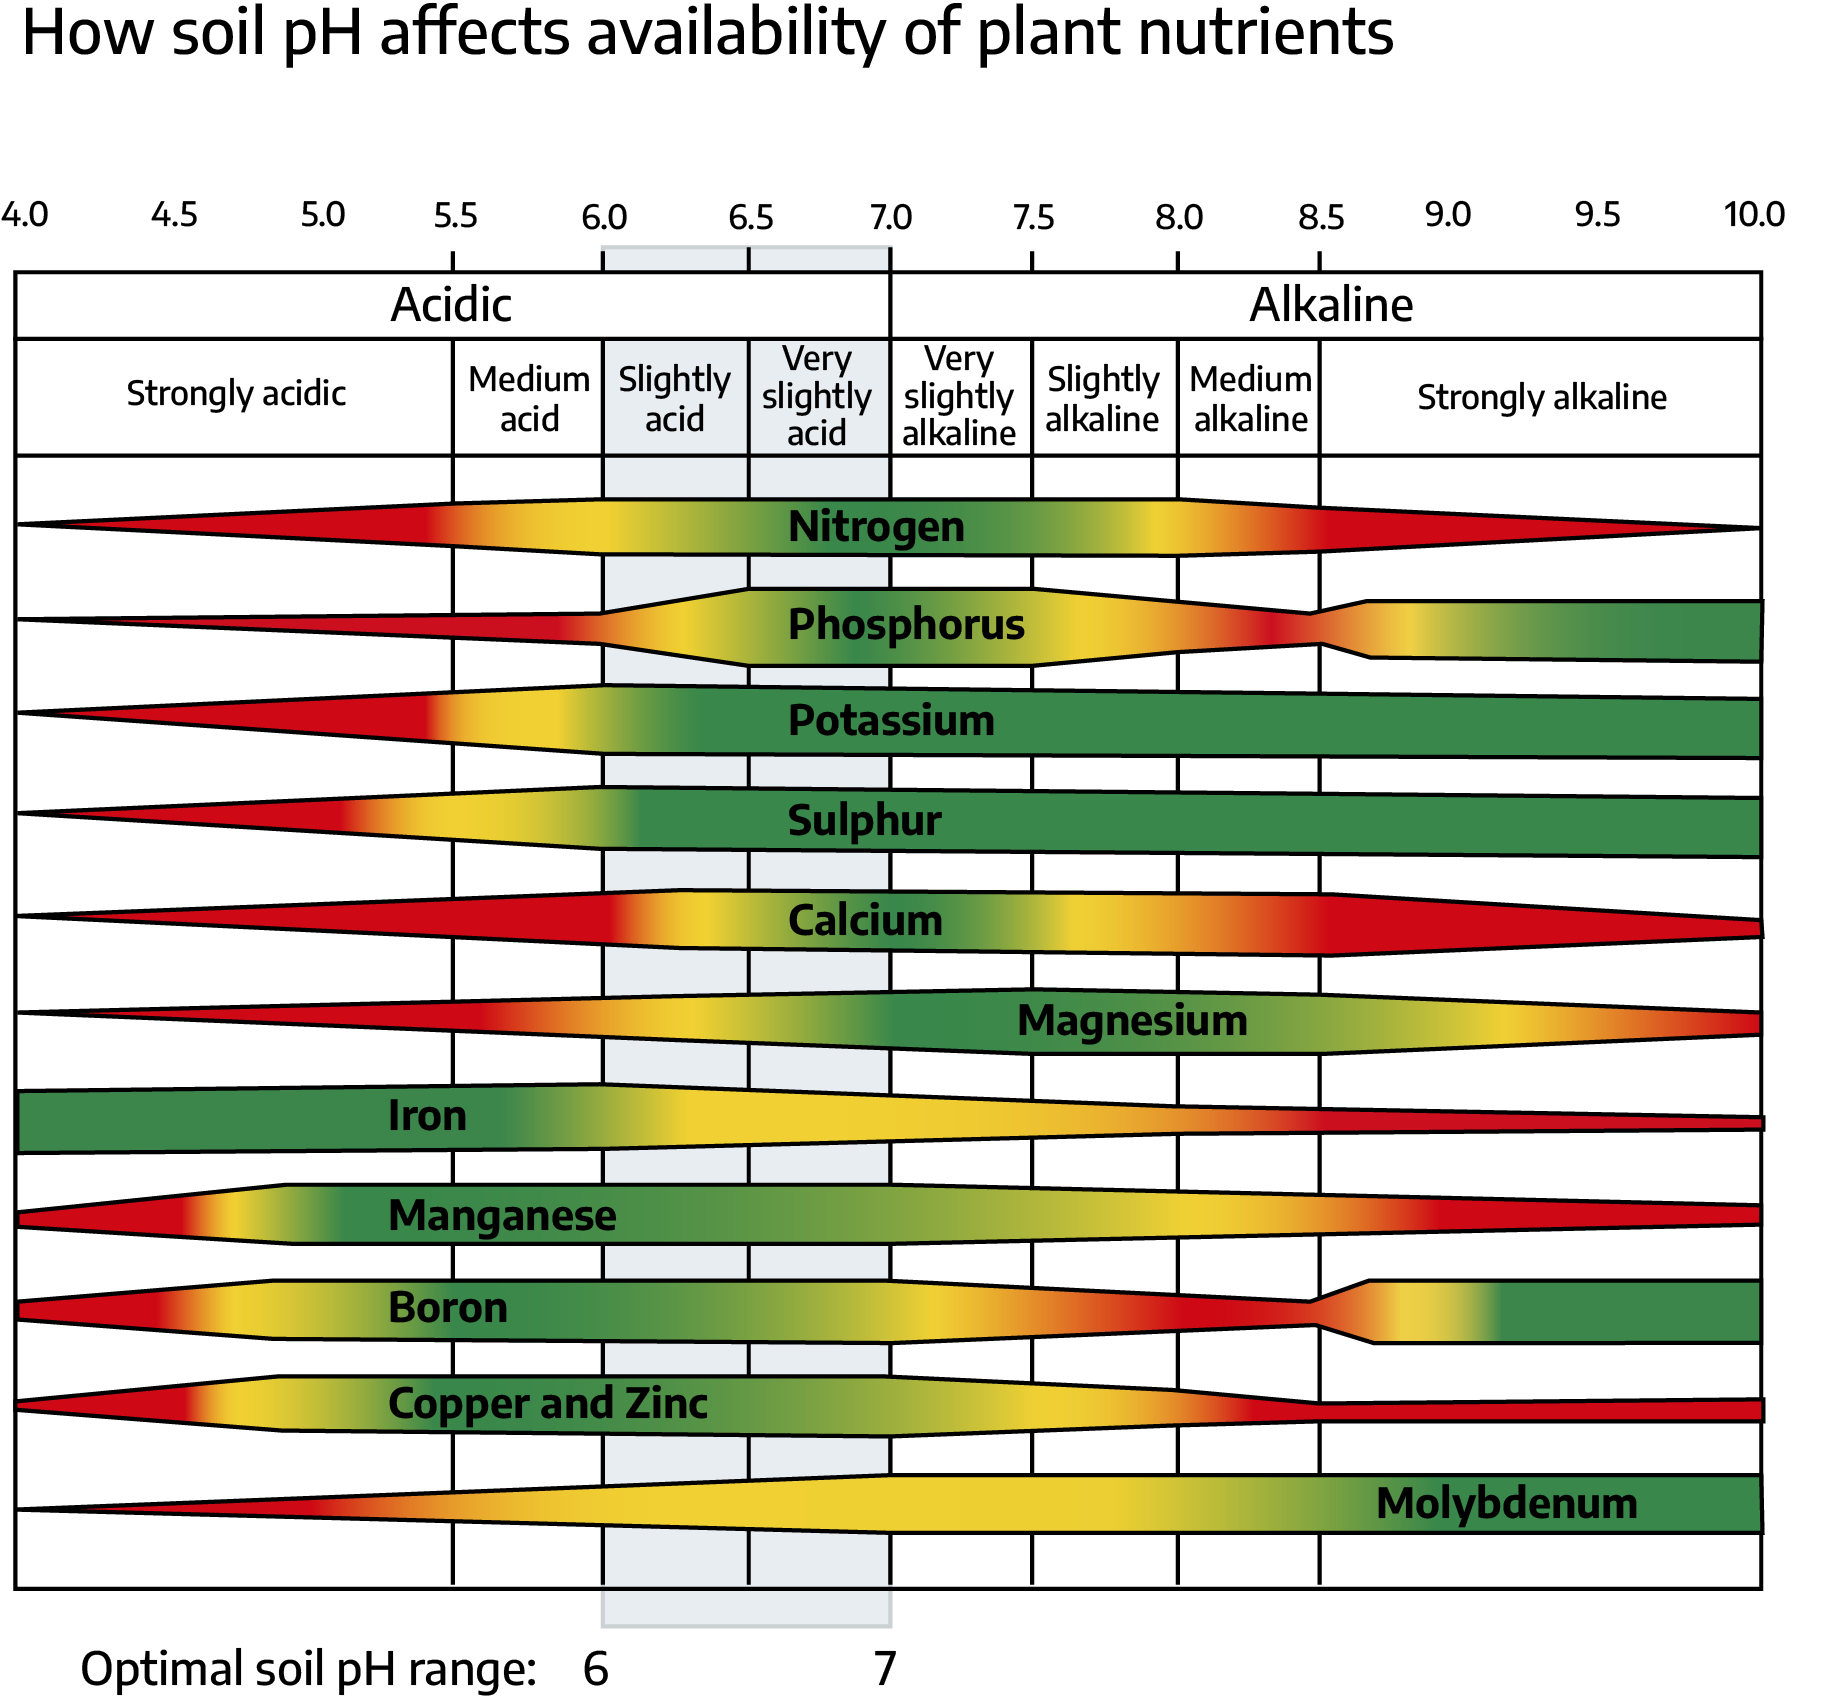 A diagram showing the nutrient availability of nitrogen, phosphorus, potassium, sulphur, calcium, magnesium, iron, manganese, oron, copper and zinc, and molybdenum by pH within the soil. Optimal soil pH is labeled between 6 and 7.